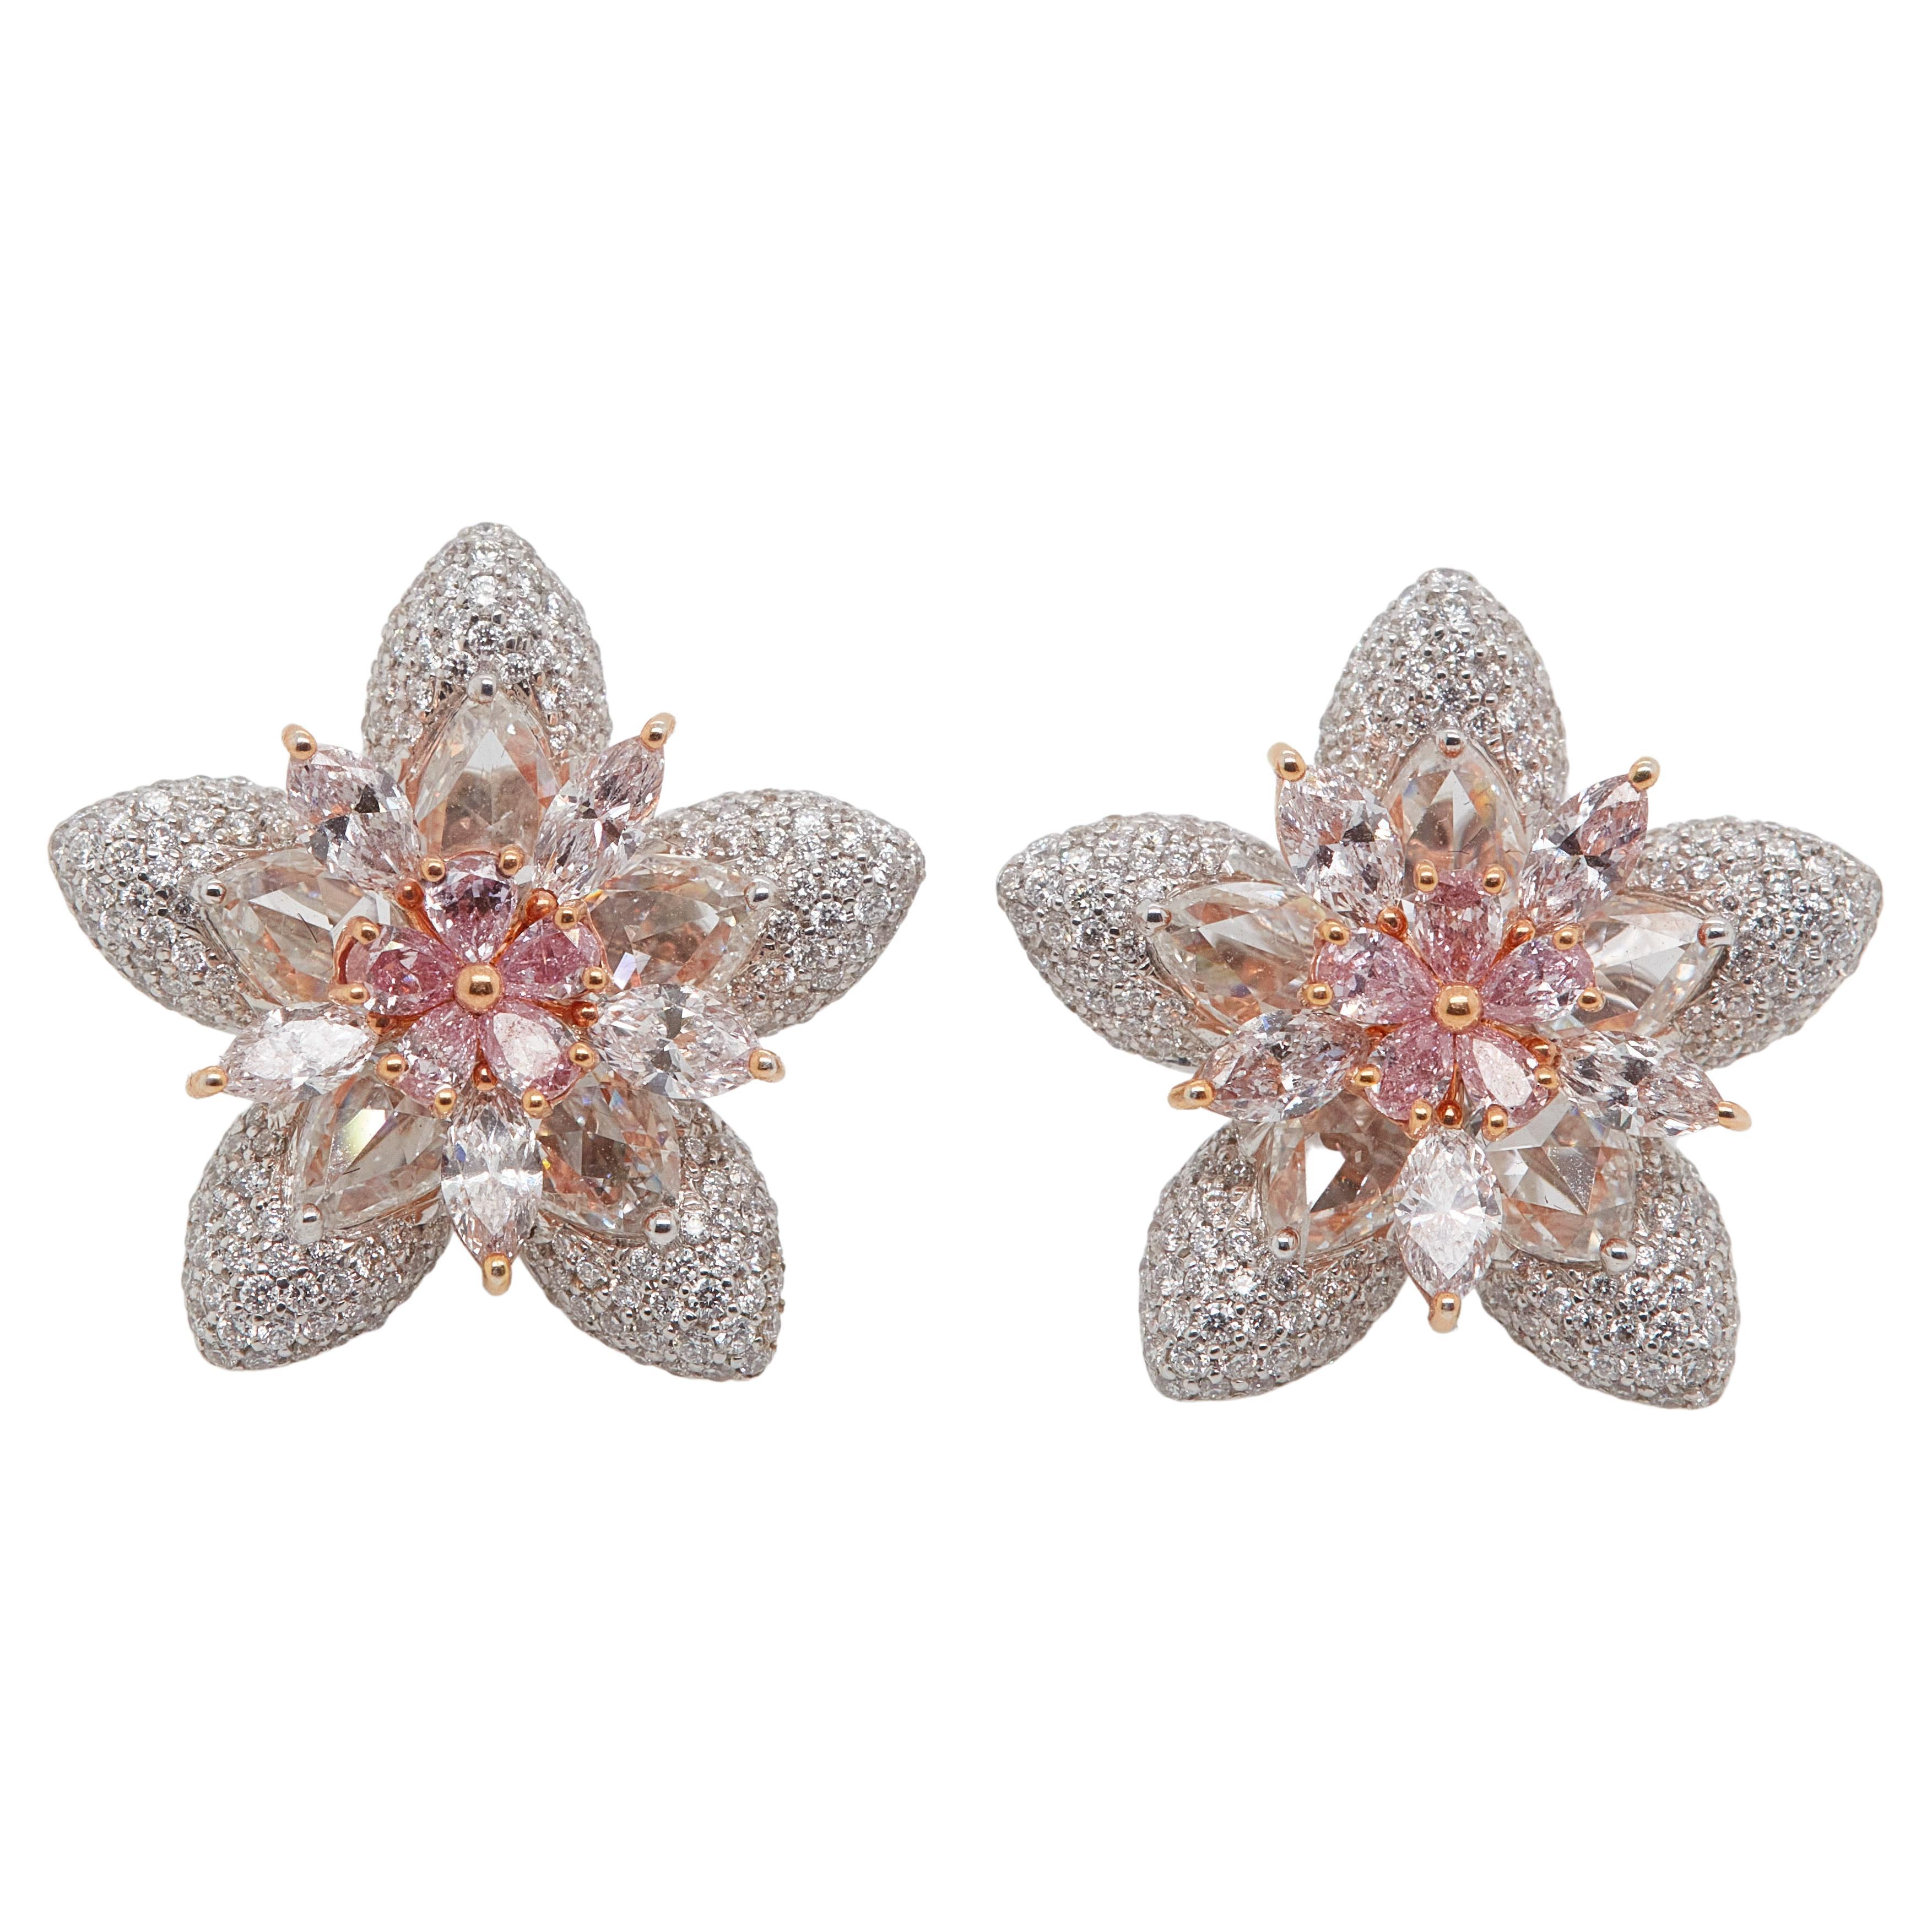 A perfectly matched earrings featured Pink Star Marquise-cut Fancy Pink Diamond Stud Earrings EGL Certified diamonds set in a flower motif. These earrings are crafted in 18k white and pink gold feature 10 pear shape fancy pink diamonds weighing 0.47